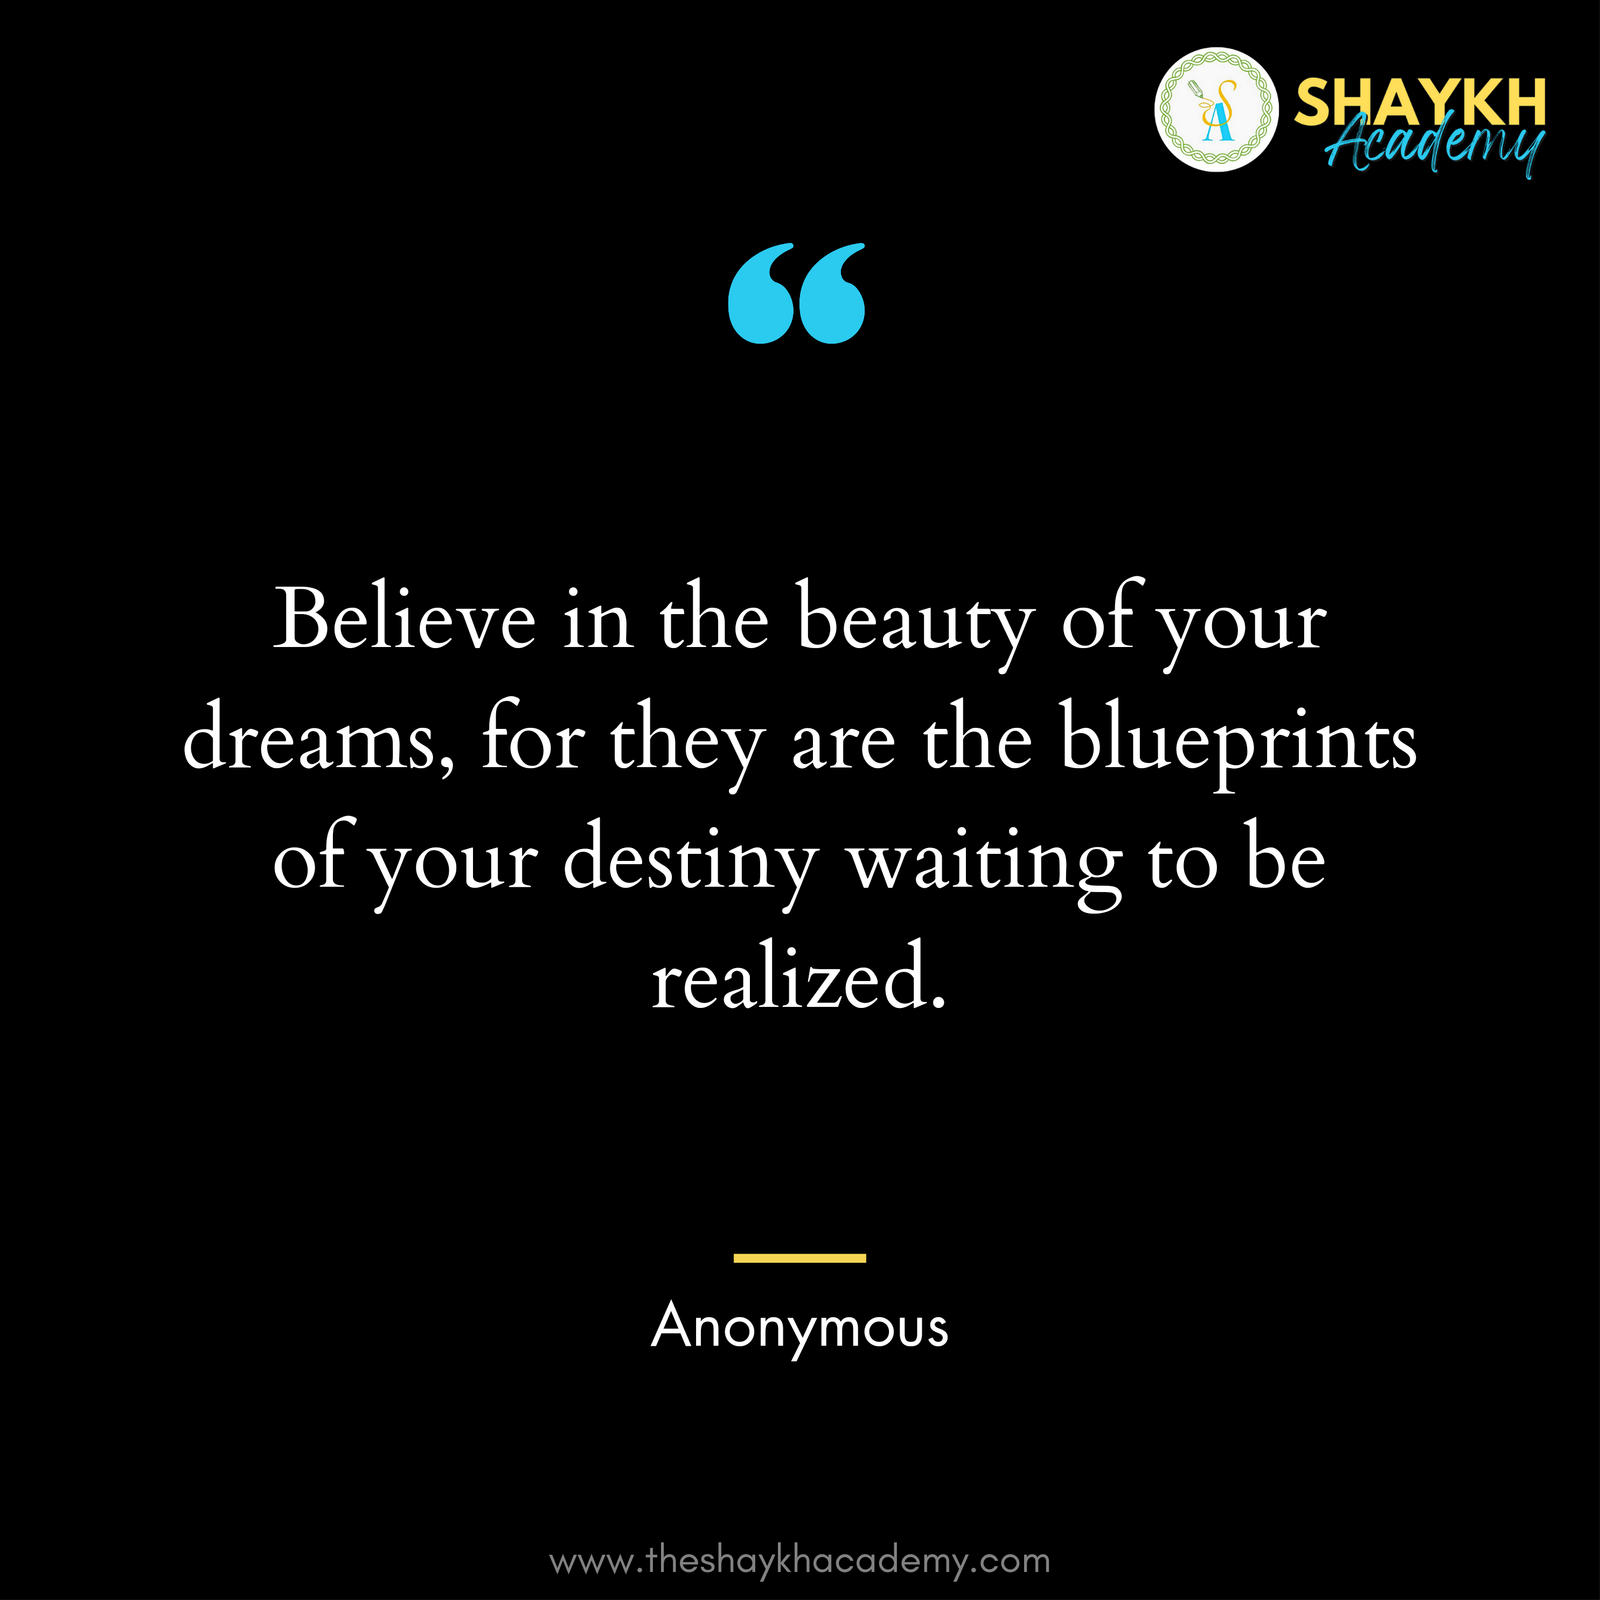 Believe in the beauty of your dreams, for they are the blueprints of your destiny waiting to be realized.